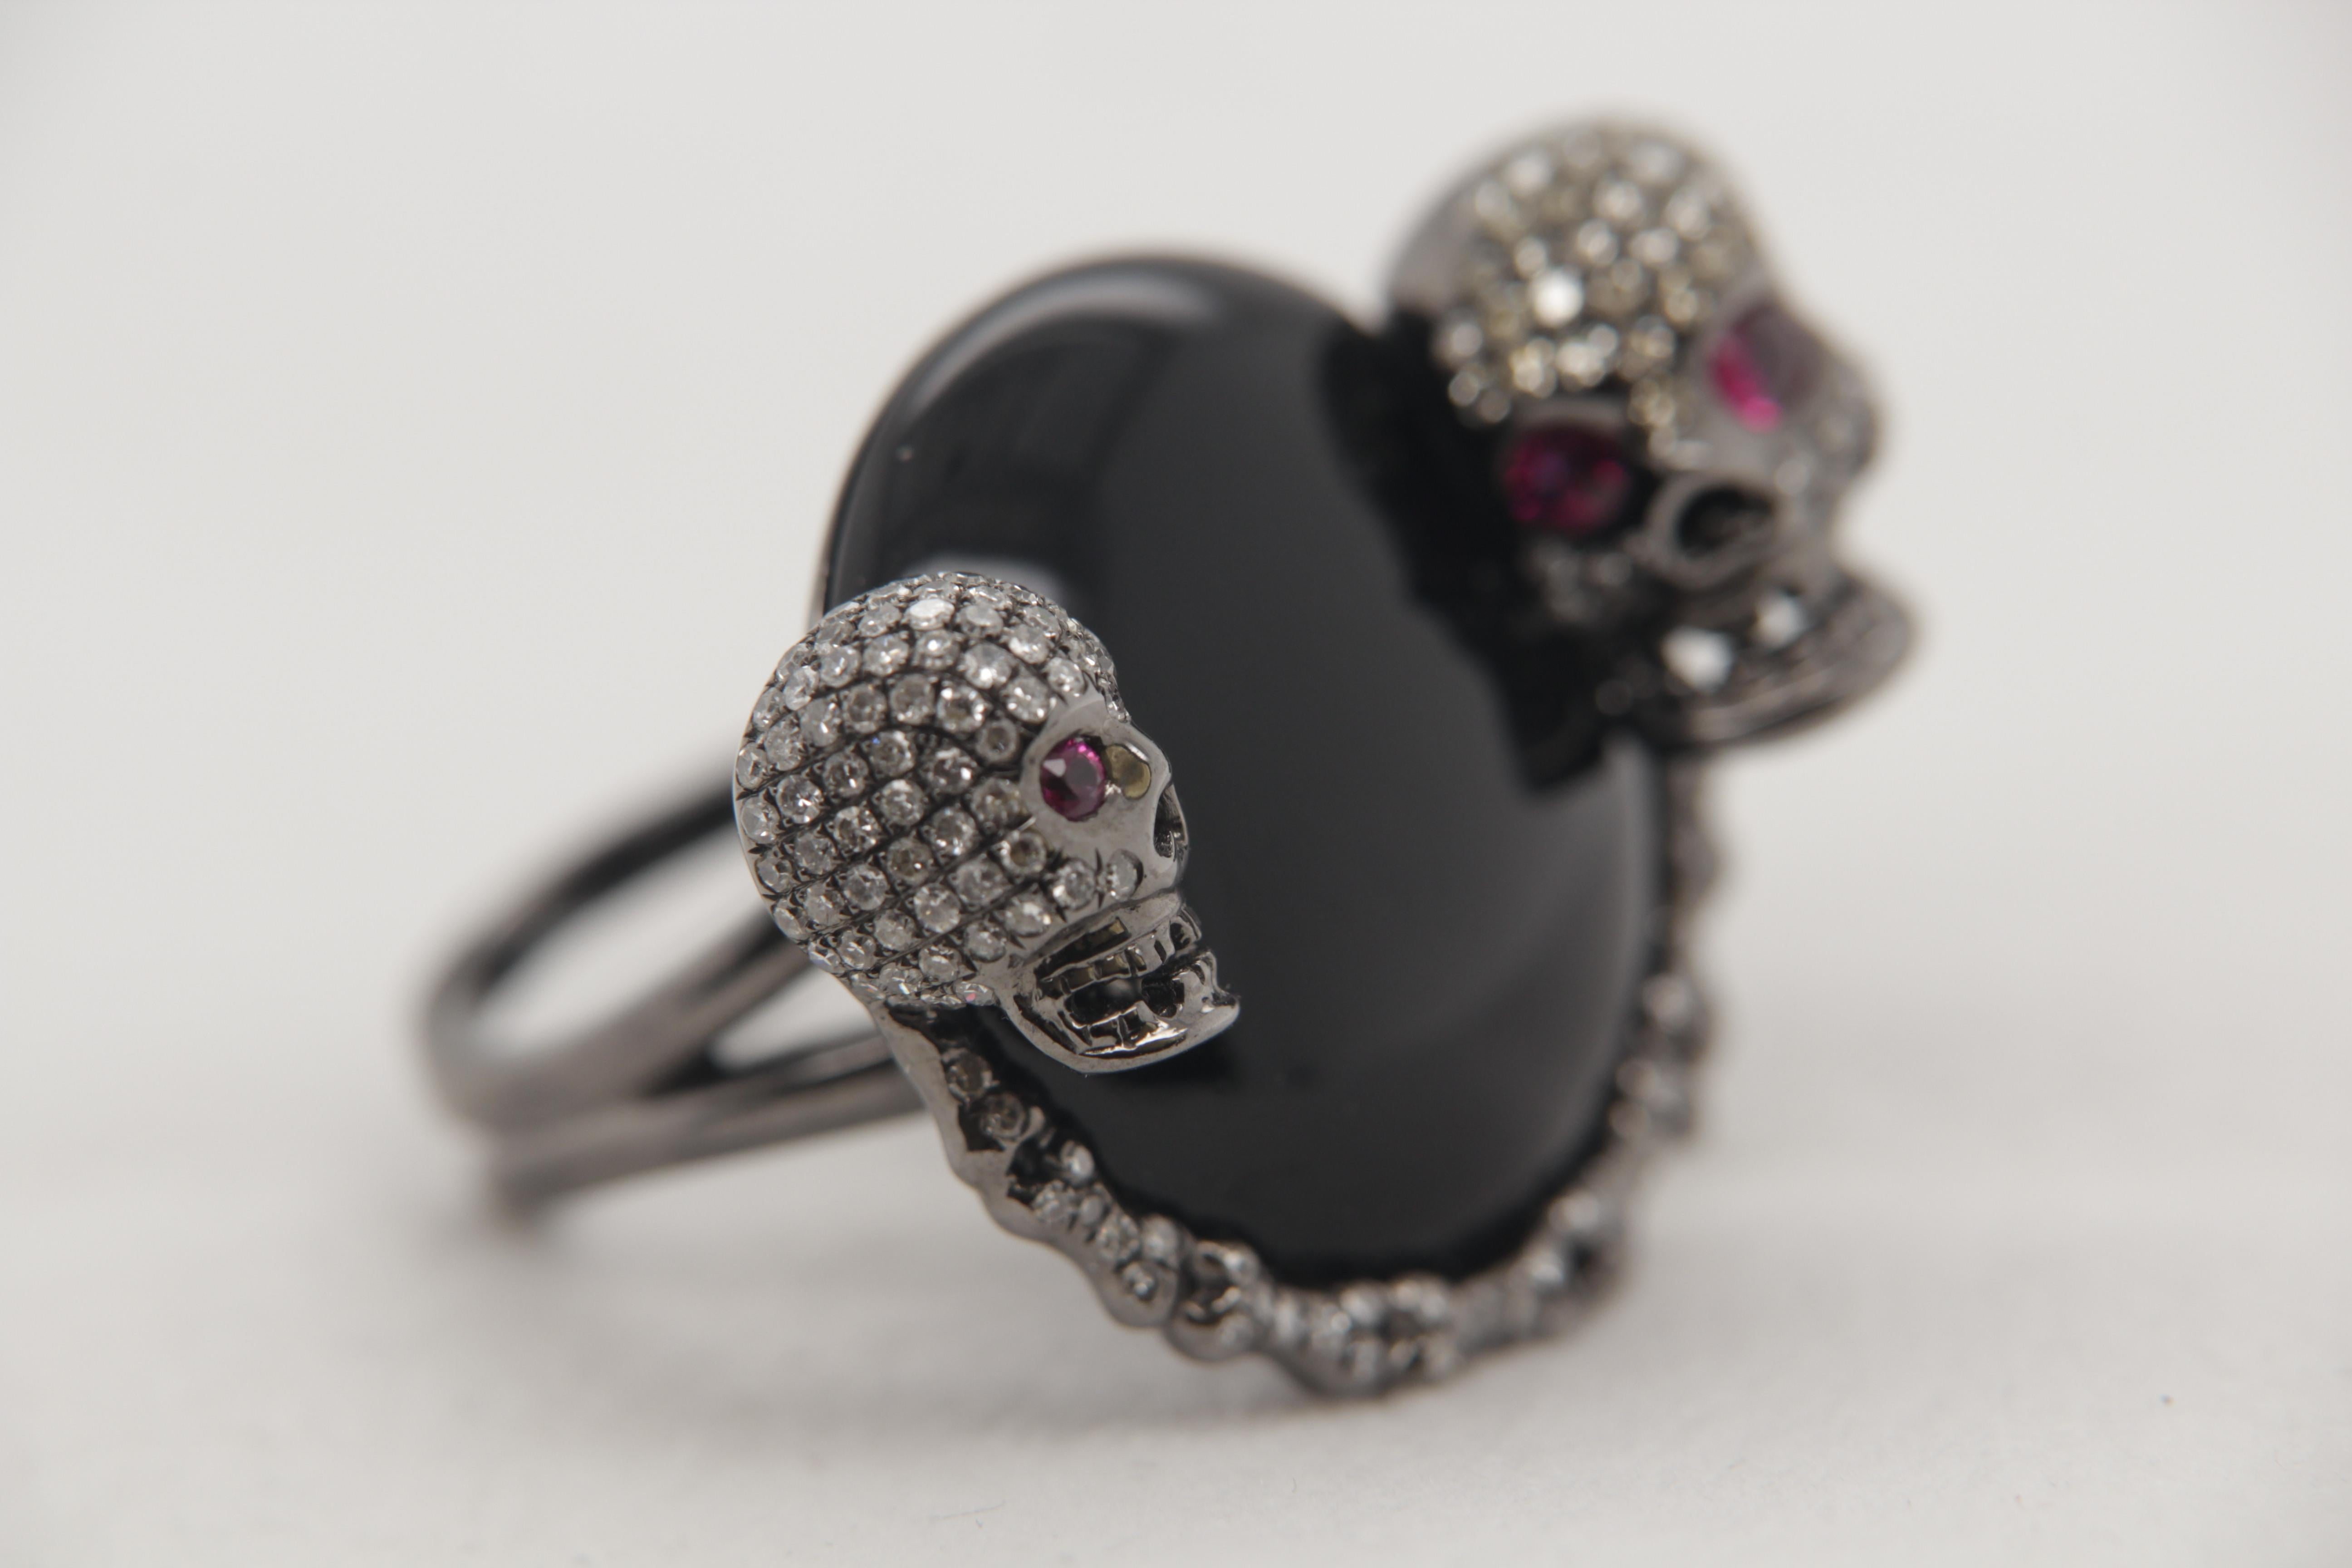 A brand new onyx and diamond ring in 18 karat gold. The onyx weigh 20.00 carat, ruby weigh 0.42 carat and diamond weigh 2.17 carat. The total ring weight is 20.48 grams. The ring resembles two skull.